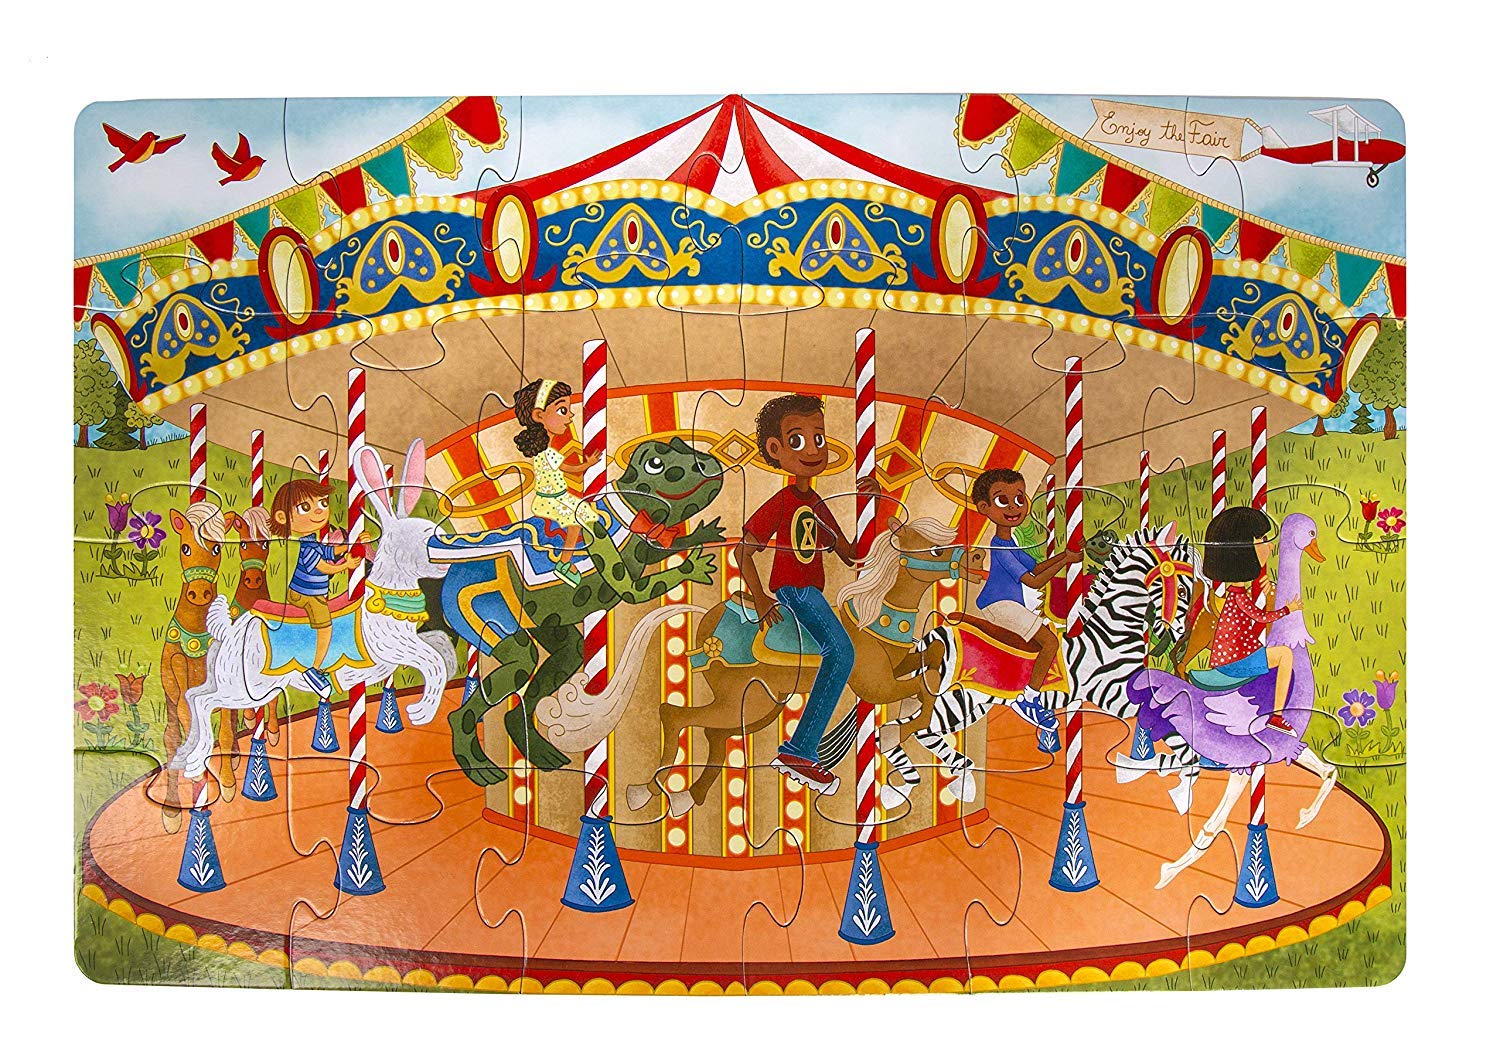 Upbounders: Joyful Carousel Animals Numbers and Colors - 24 Piece 2-Sided Beginnger Puzzle,Toddler Boy,Girl, Ages 3-5, Counting Activity with African American-Diverse Children at Play